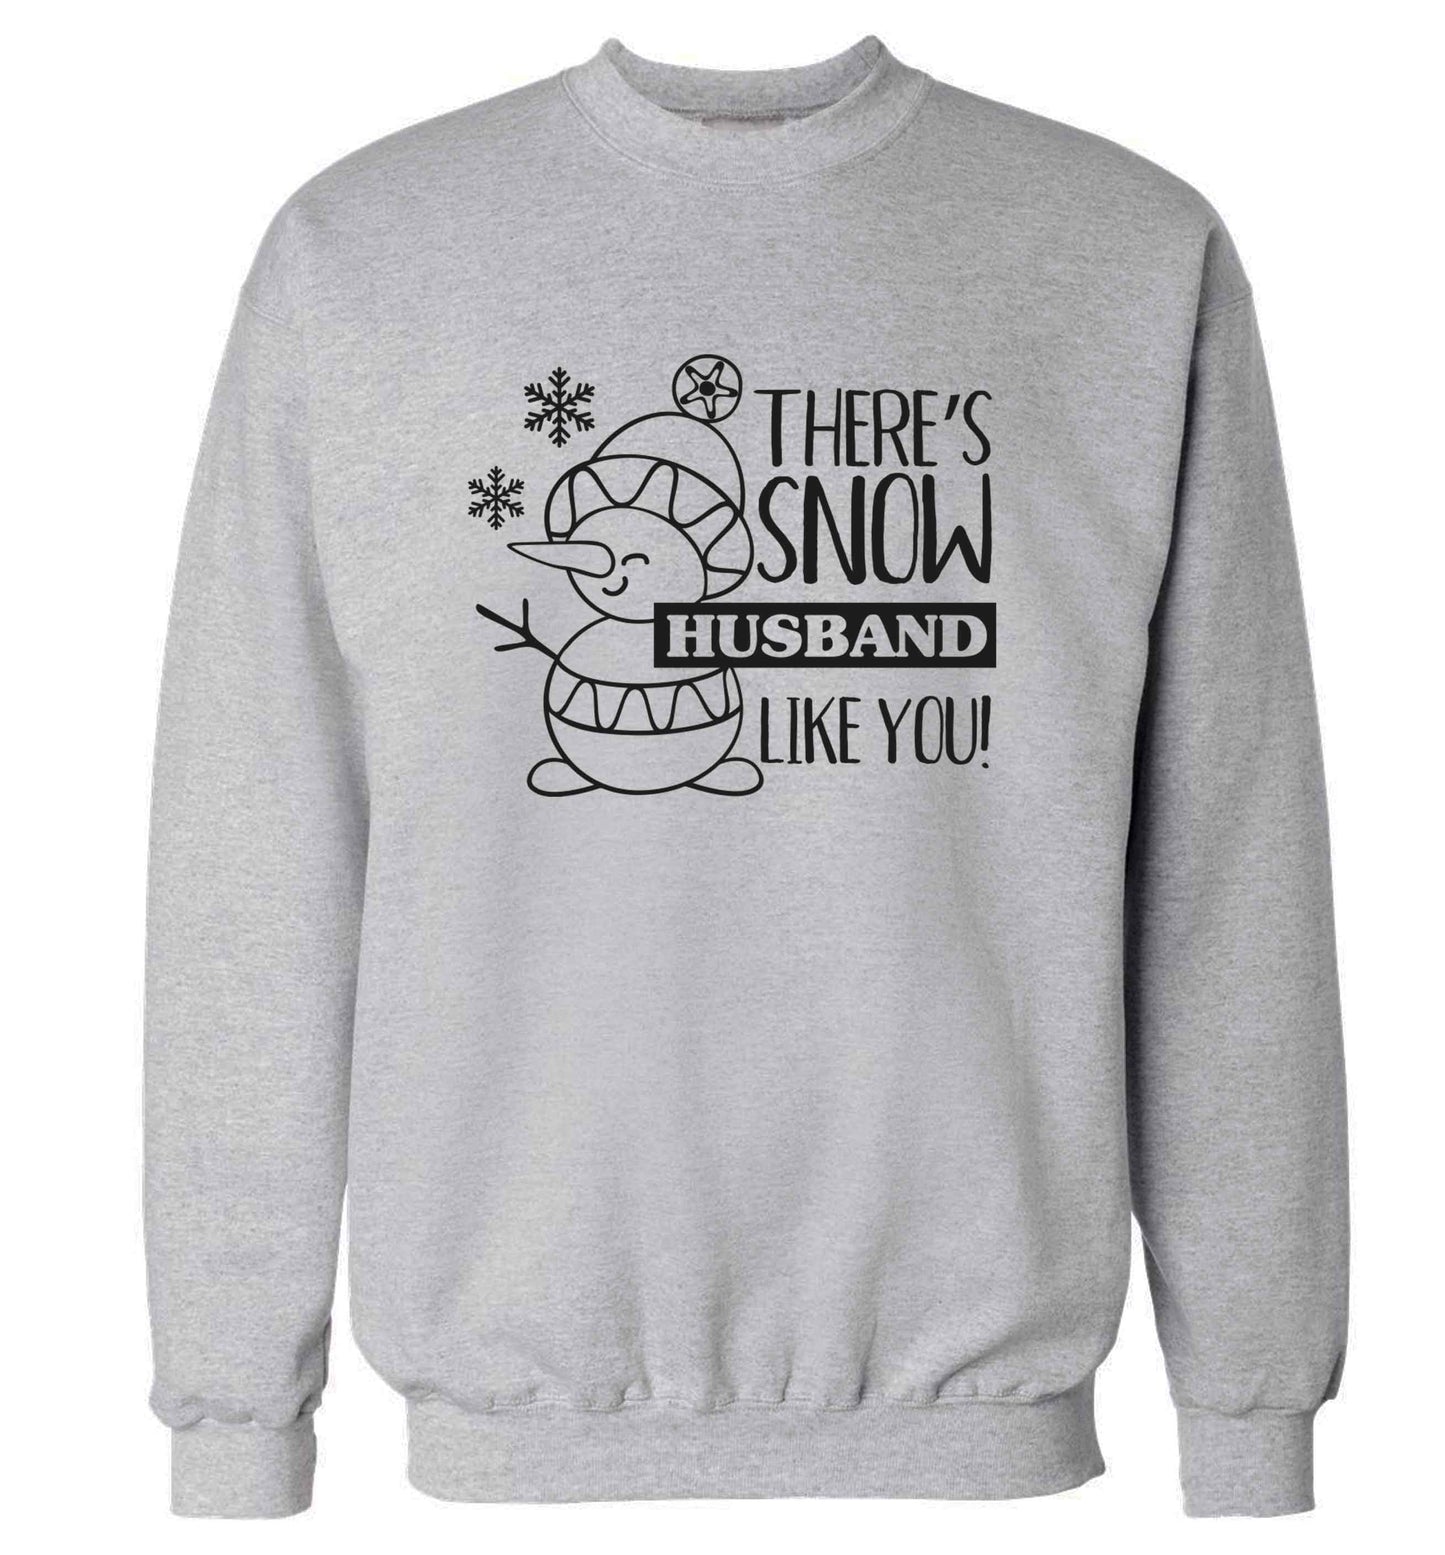 There's snow husband like you adult's unisex grey sweater 2XL